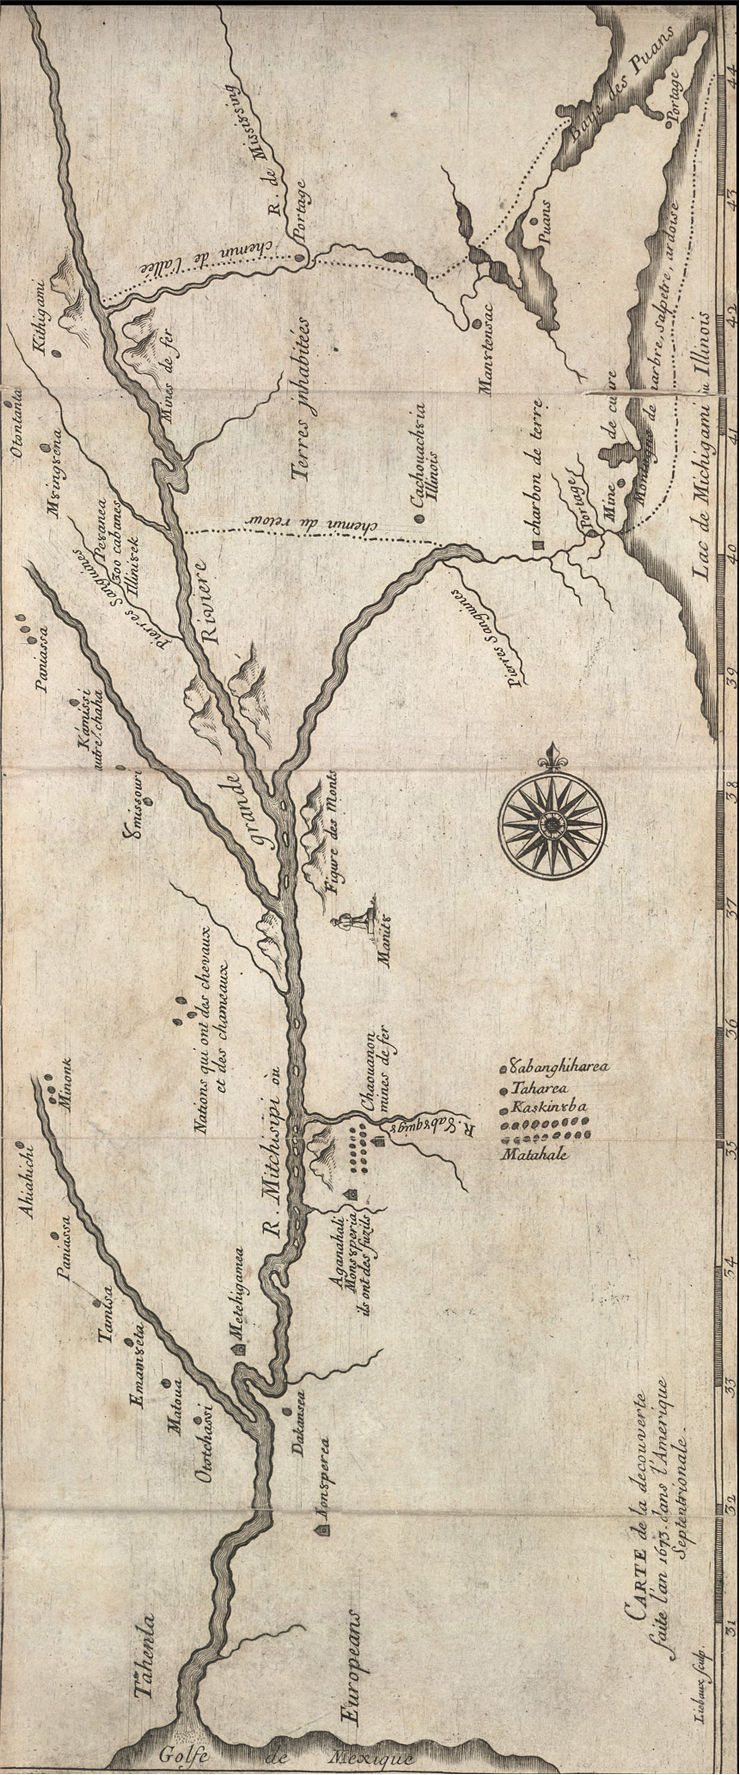 Picture Of Jacques Marquette And Jolliets 1673 Expedition Map